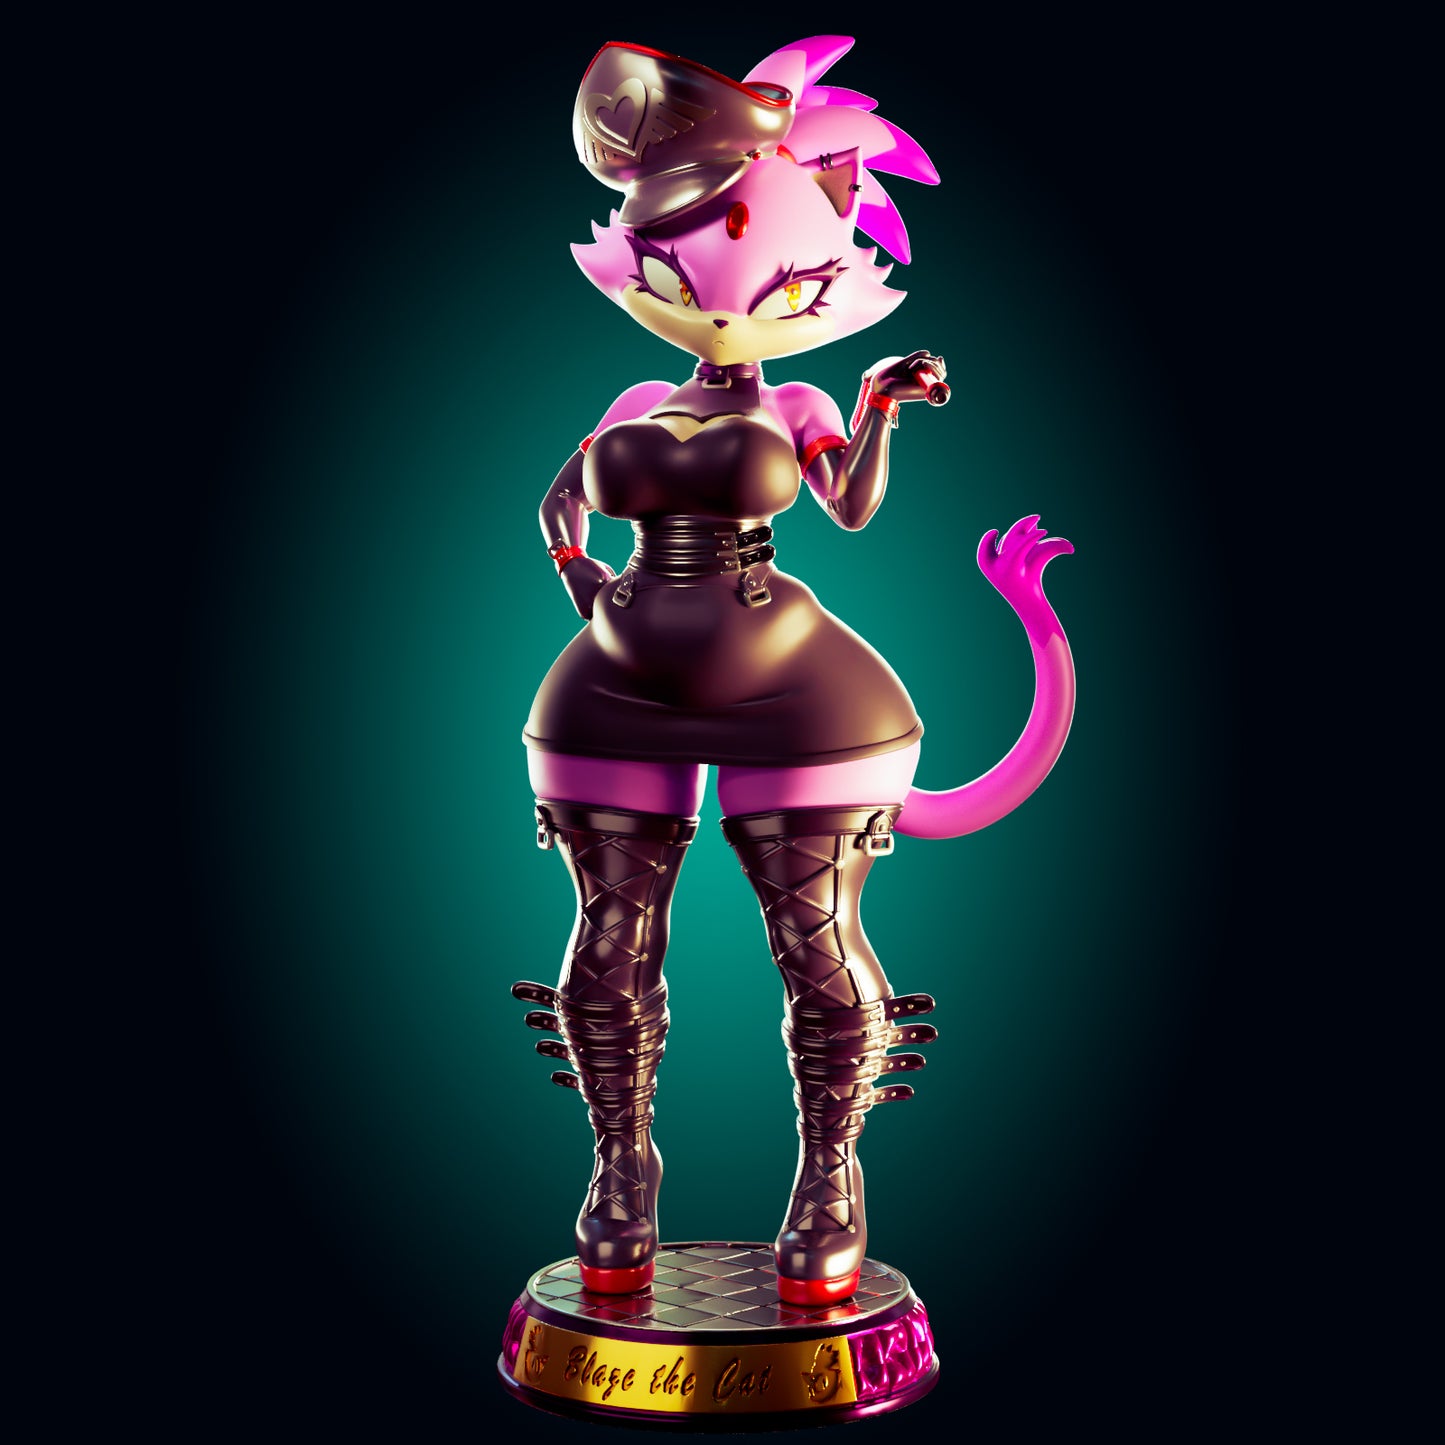 Blaze the Cat from Sonic the Hedgehog from Officer Rhu Fan creation (ADULT  Including FUTA editions now available.) Model Kit for painting and collecting.